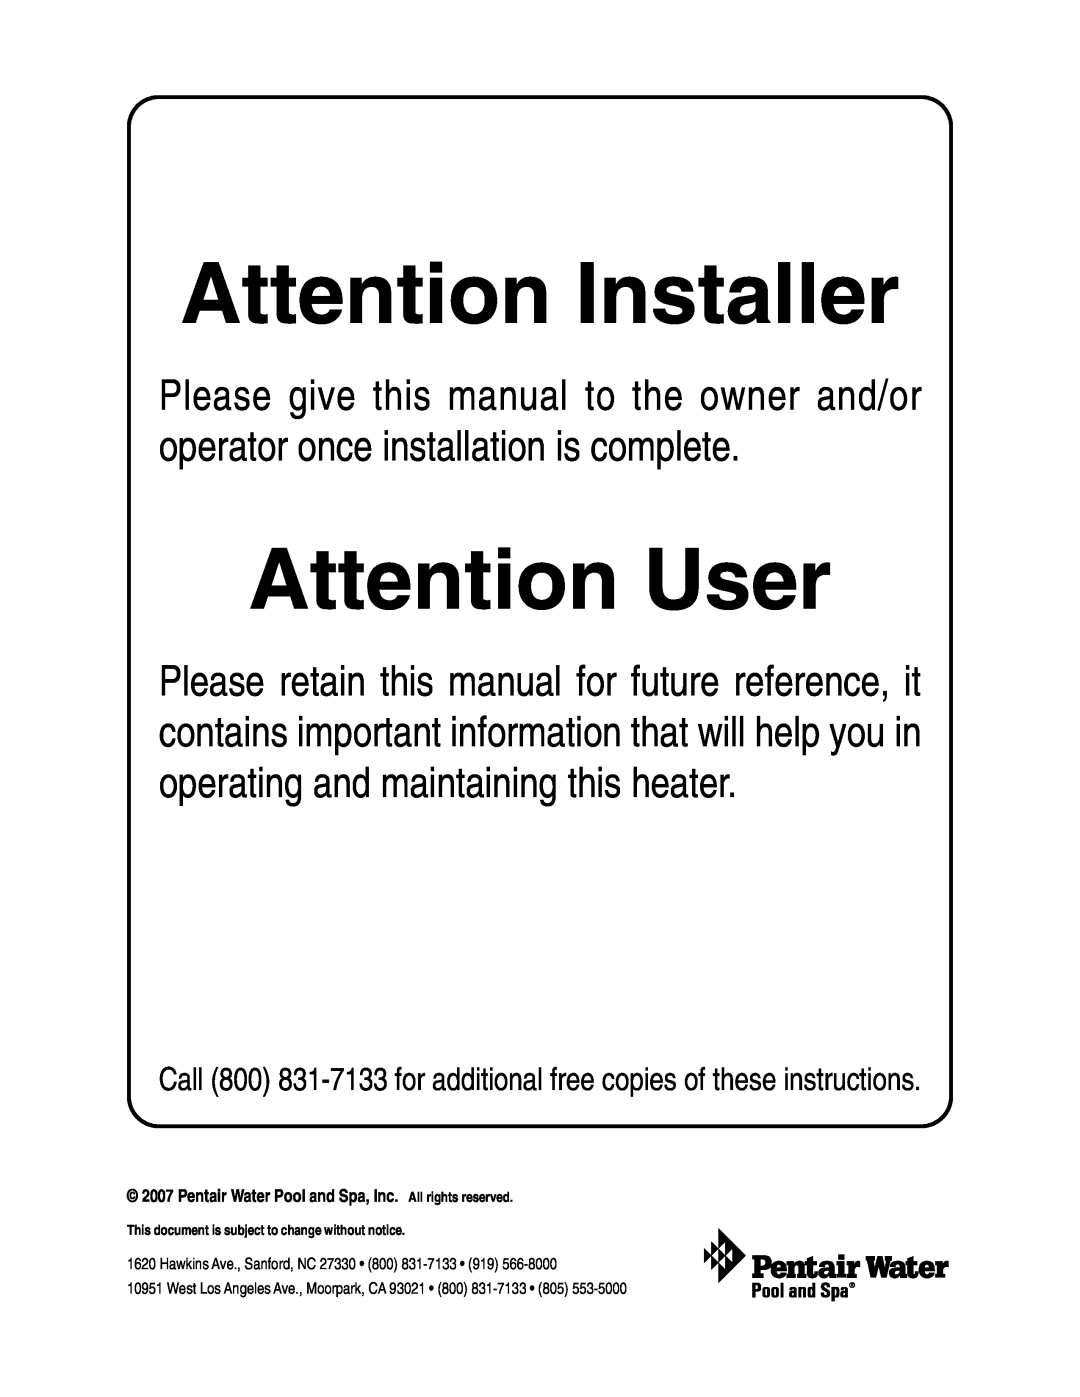 Pentair Hot Tub manual Attention Installer, Attention User, Pentair Water Pool and Spa, Inc. All rights reserved 